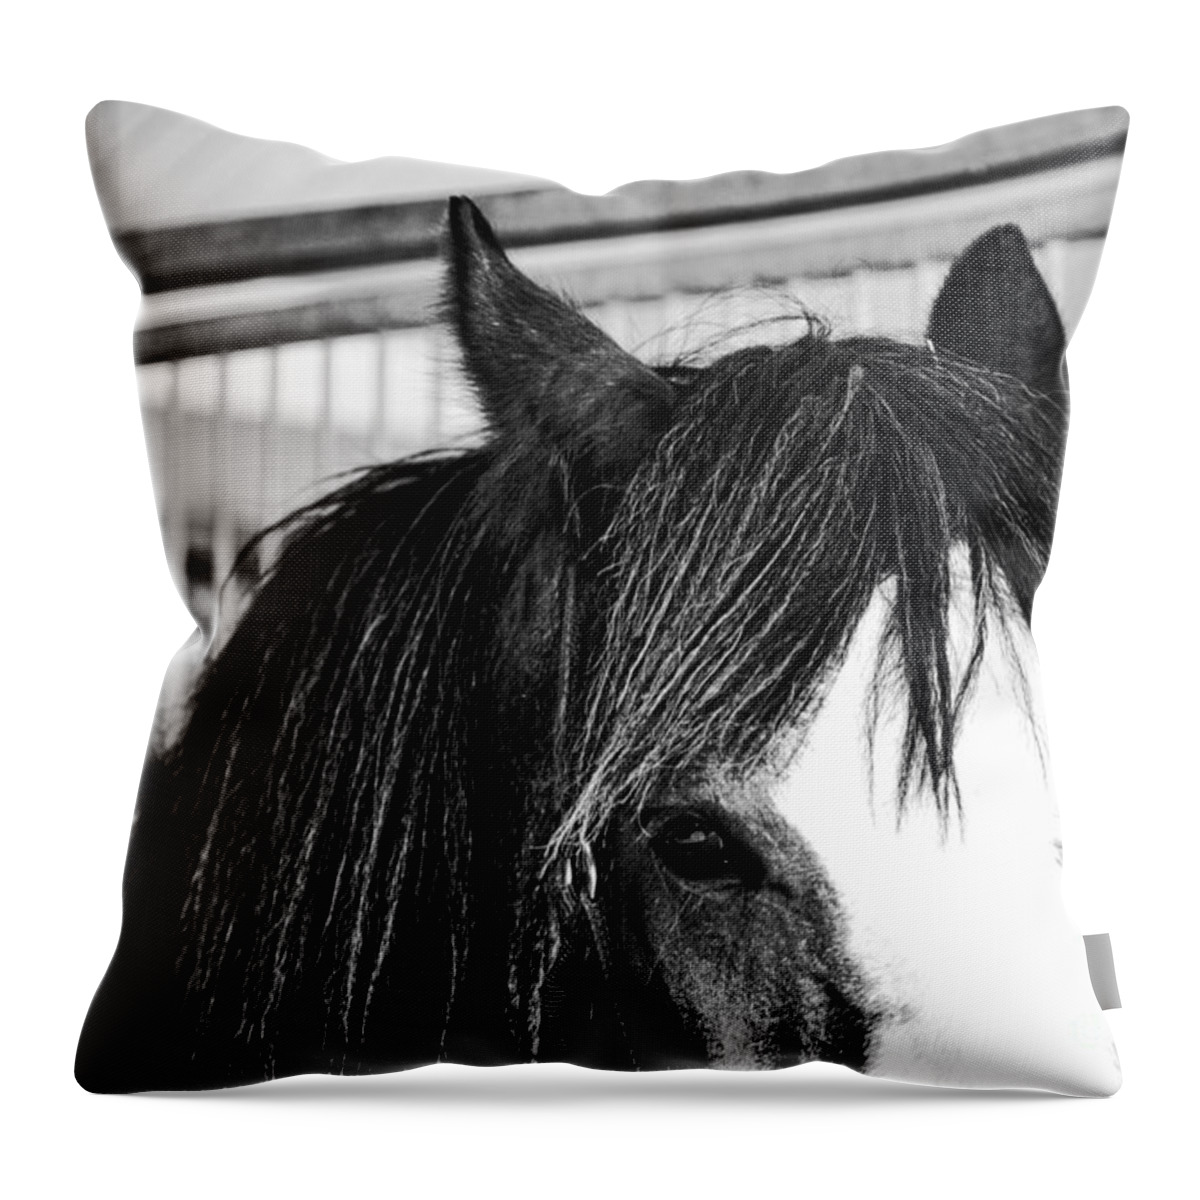 Horse Throw Pillow featuring the photograph Best Friend by Traci Cottingham